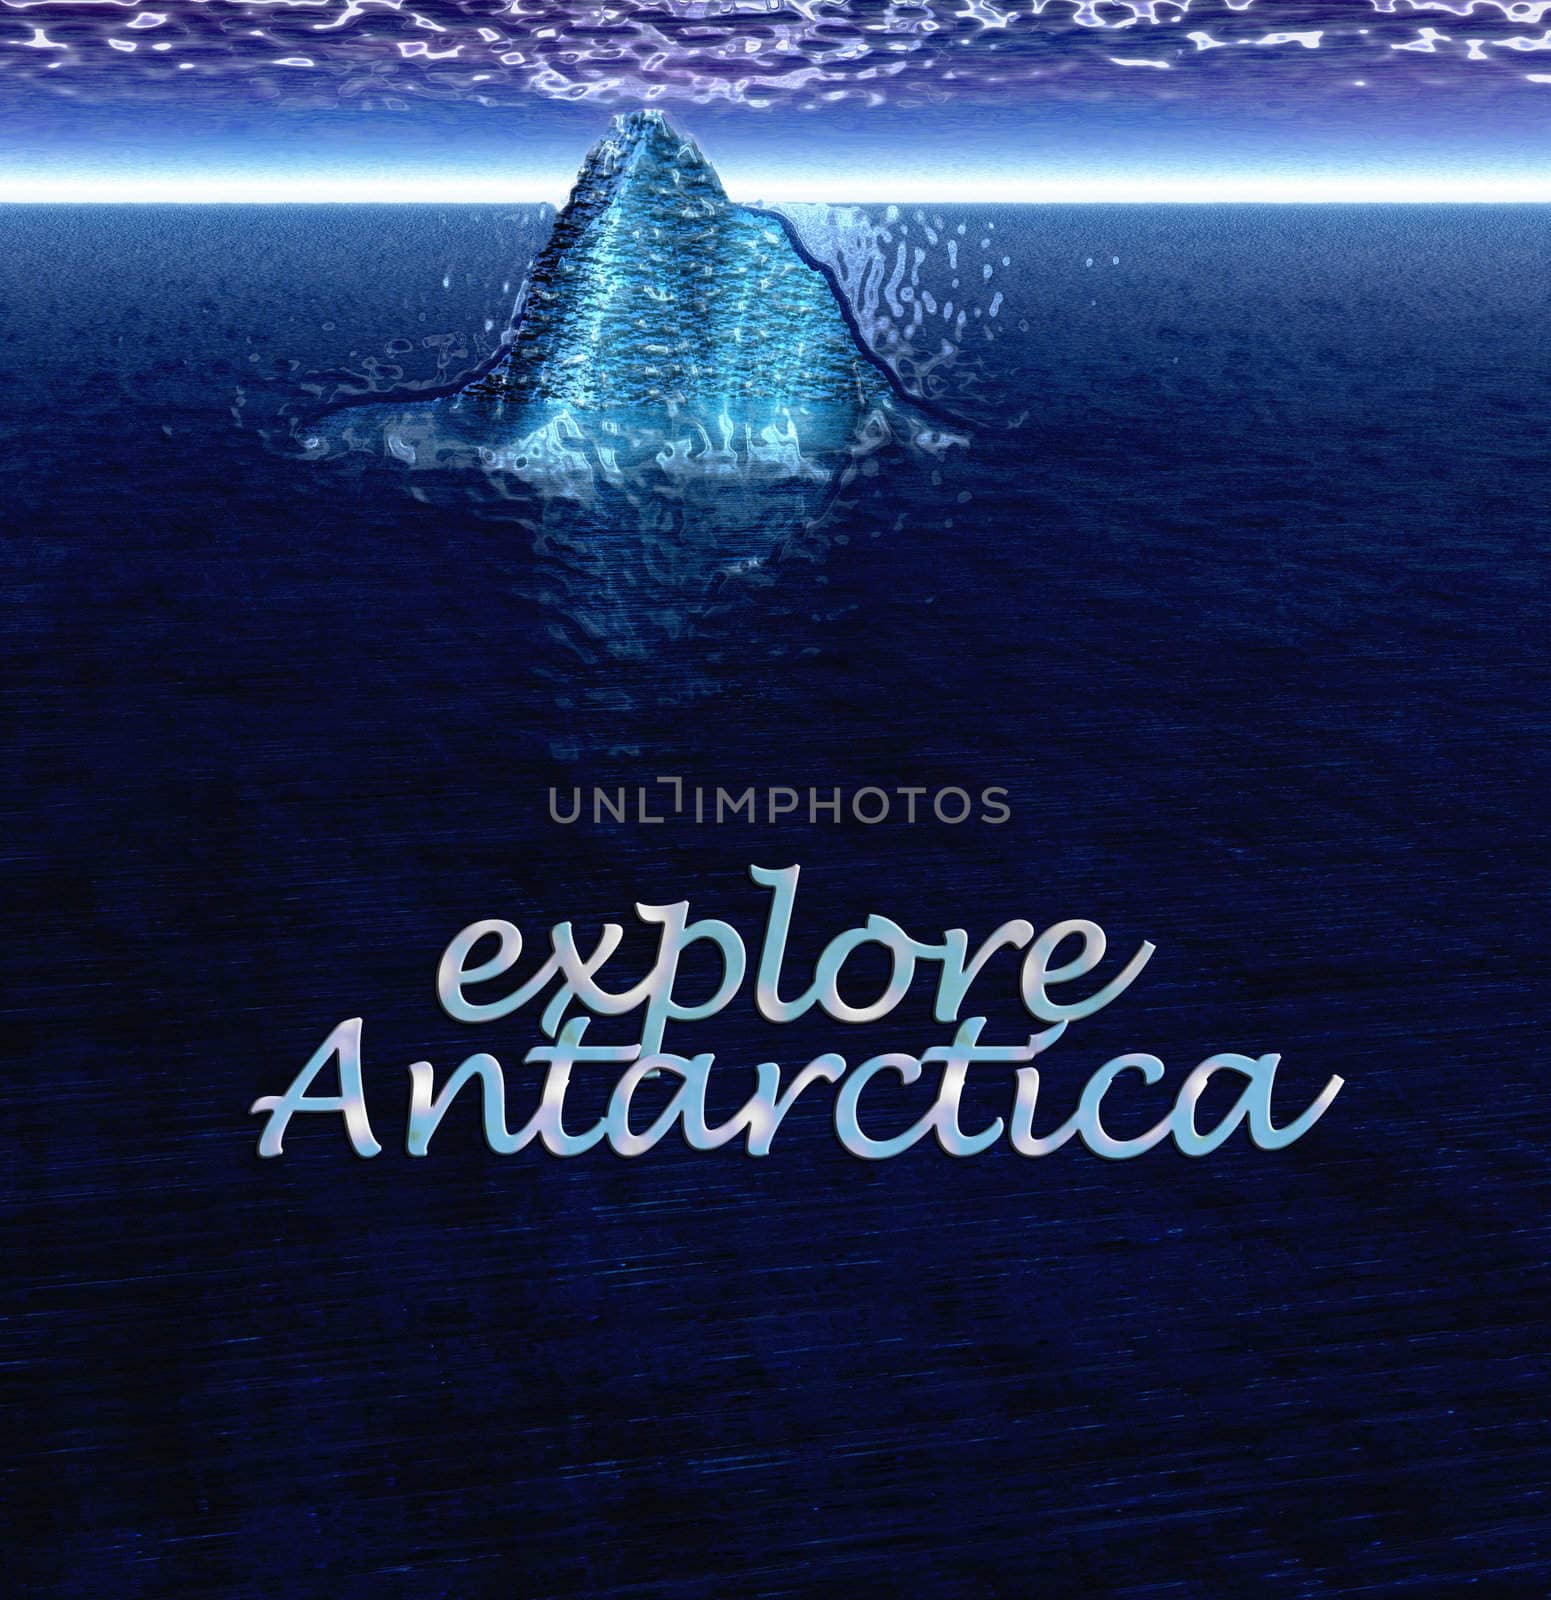 Explore Antarctica Text With Floating Iceberg in Ocean by bobbigmac